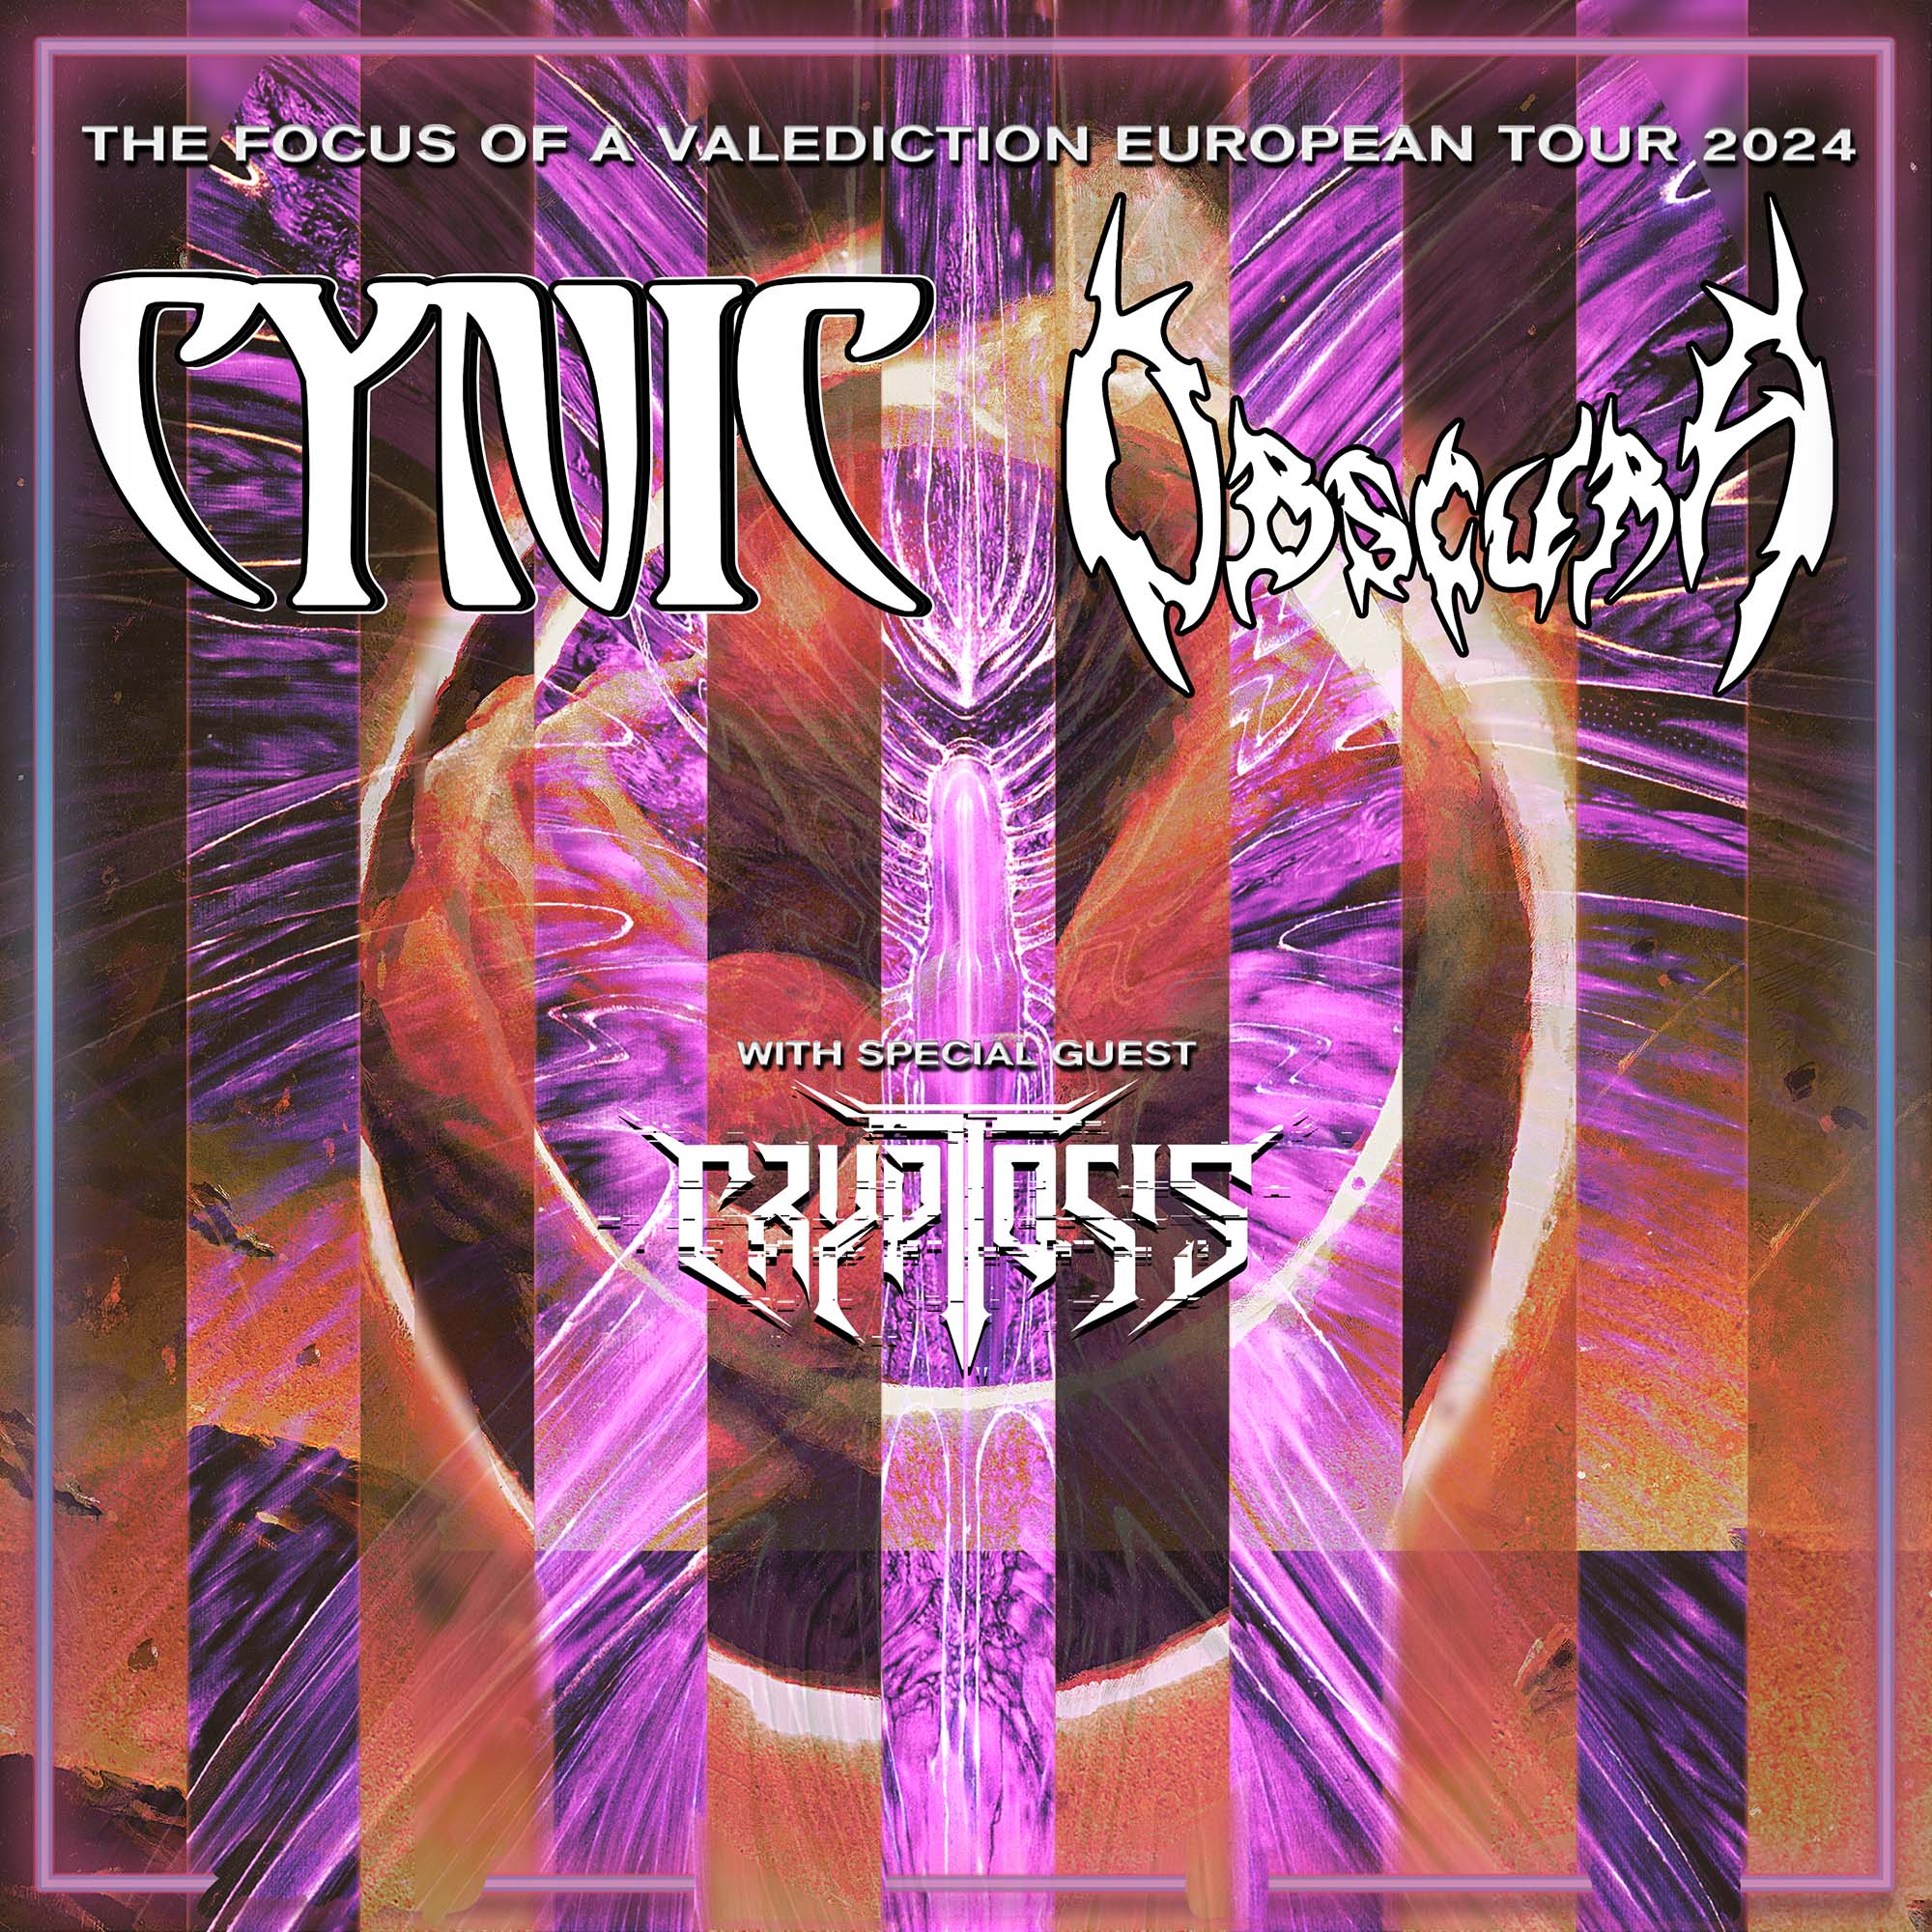 Cynic & Obscura